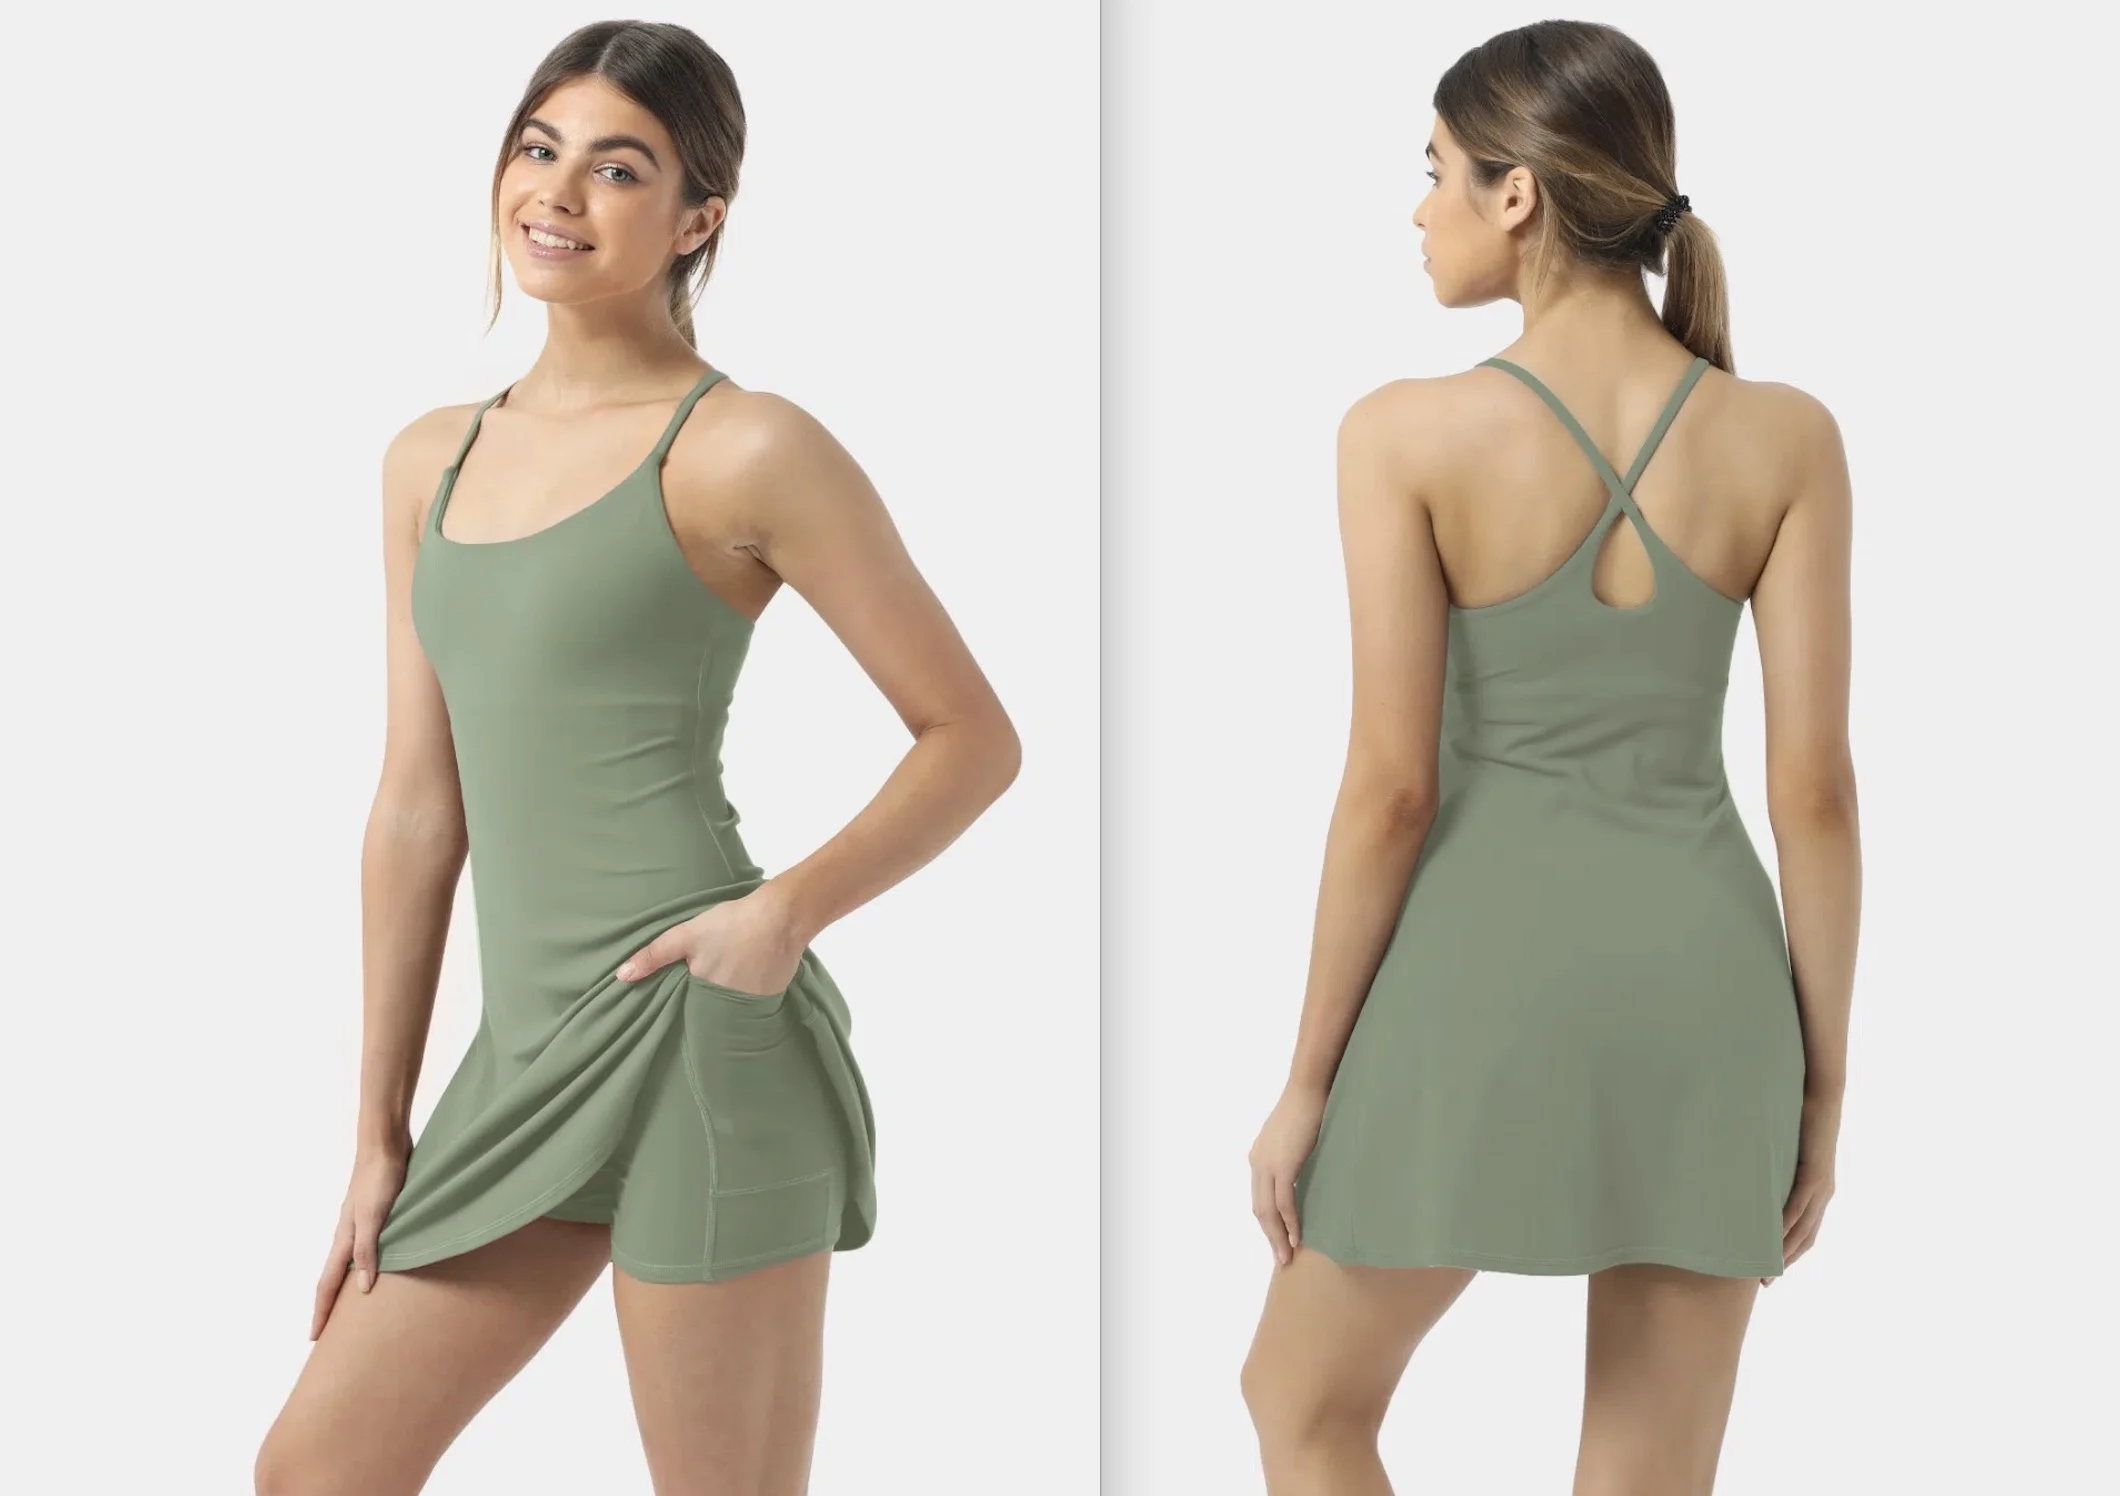 Testing the Viral TikTok Dress  Halara Everyday Dress Review and Try On 